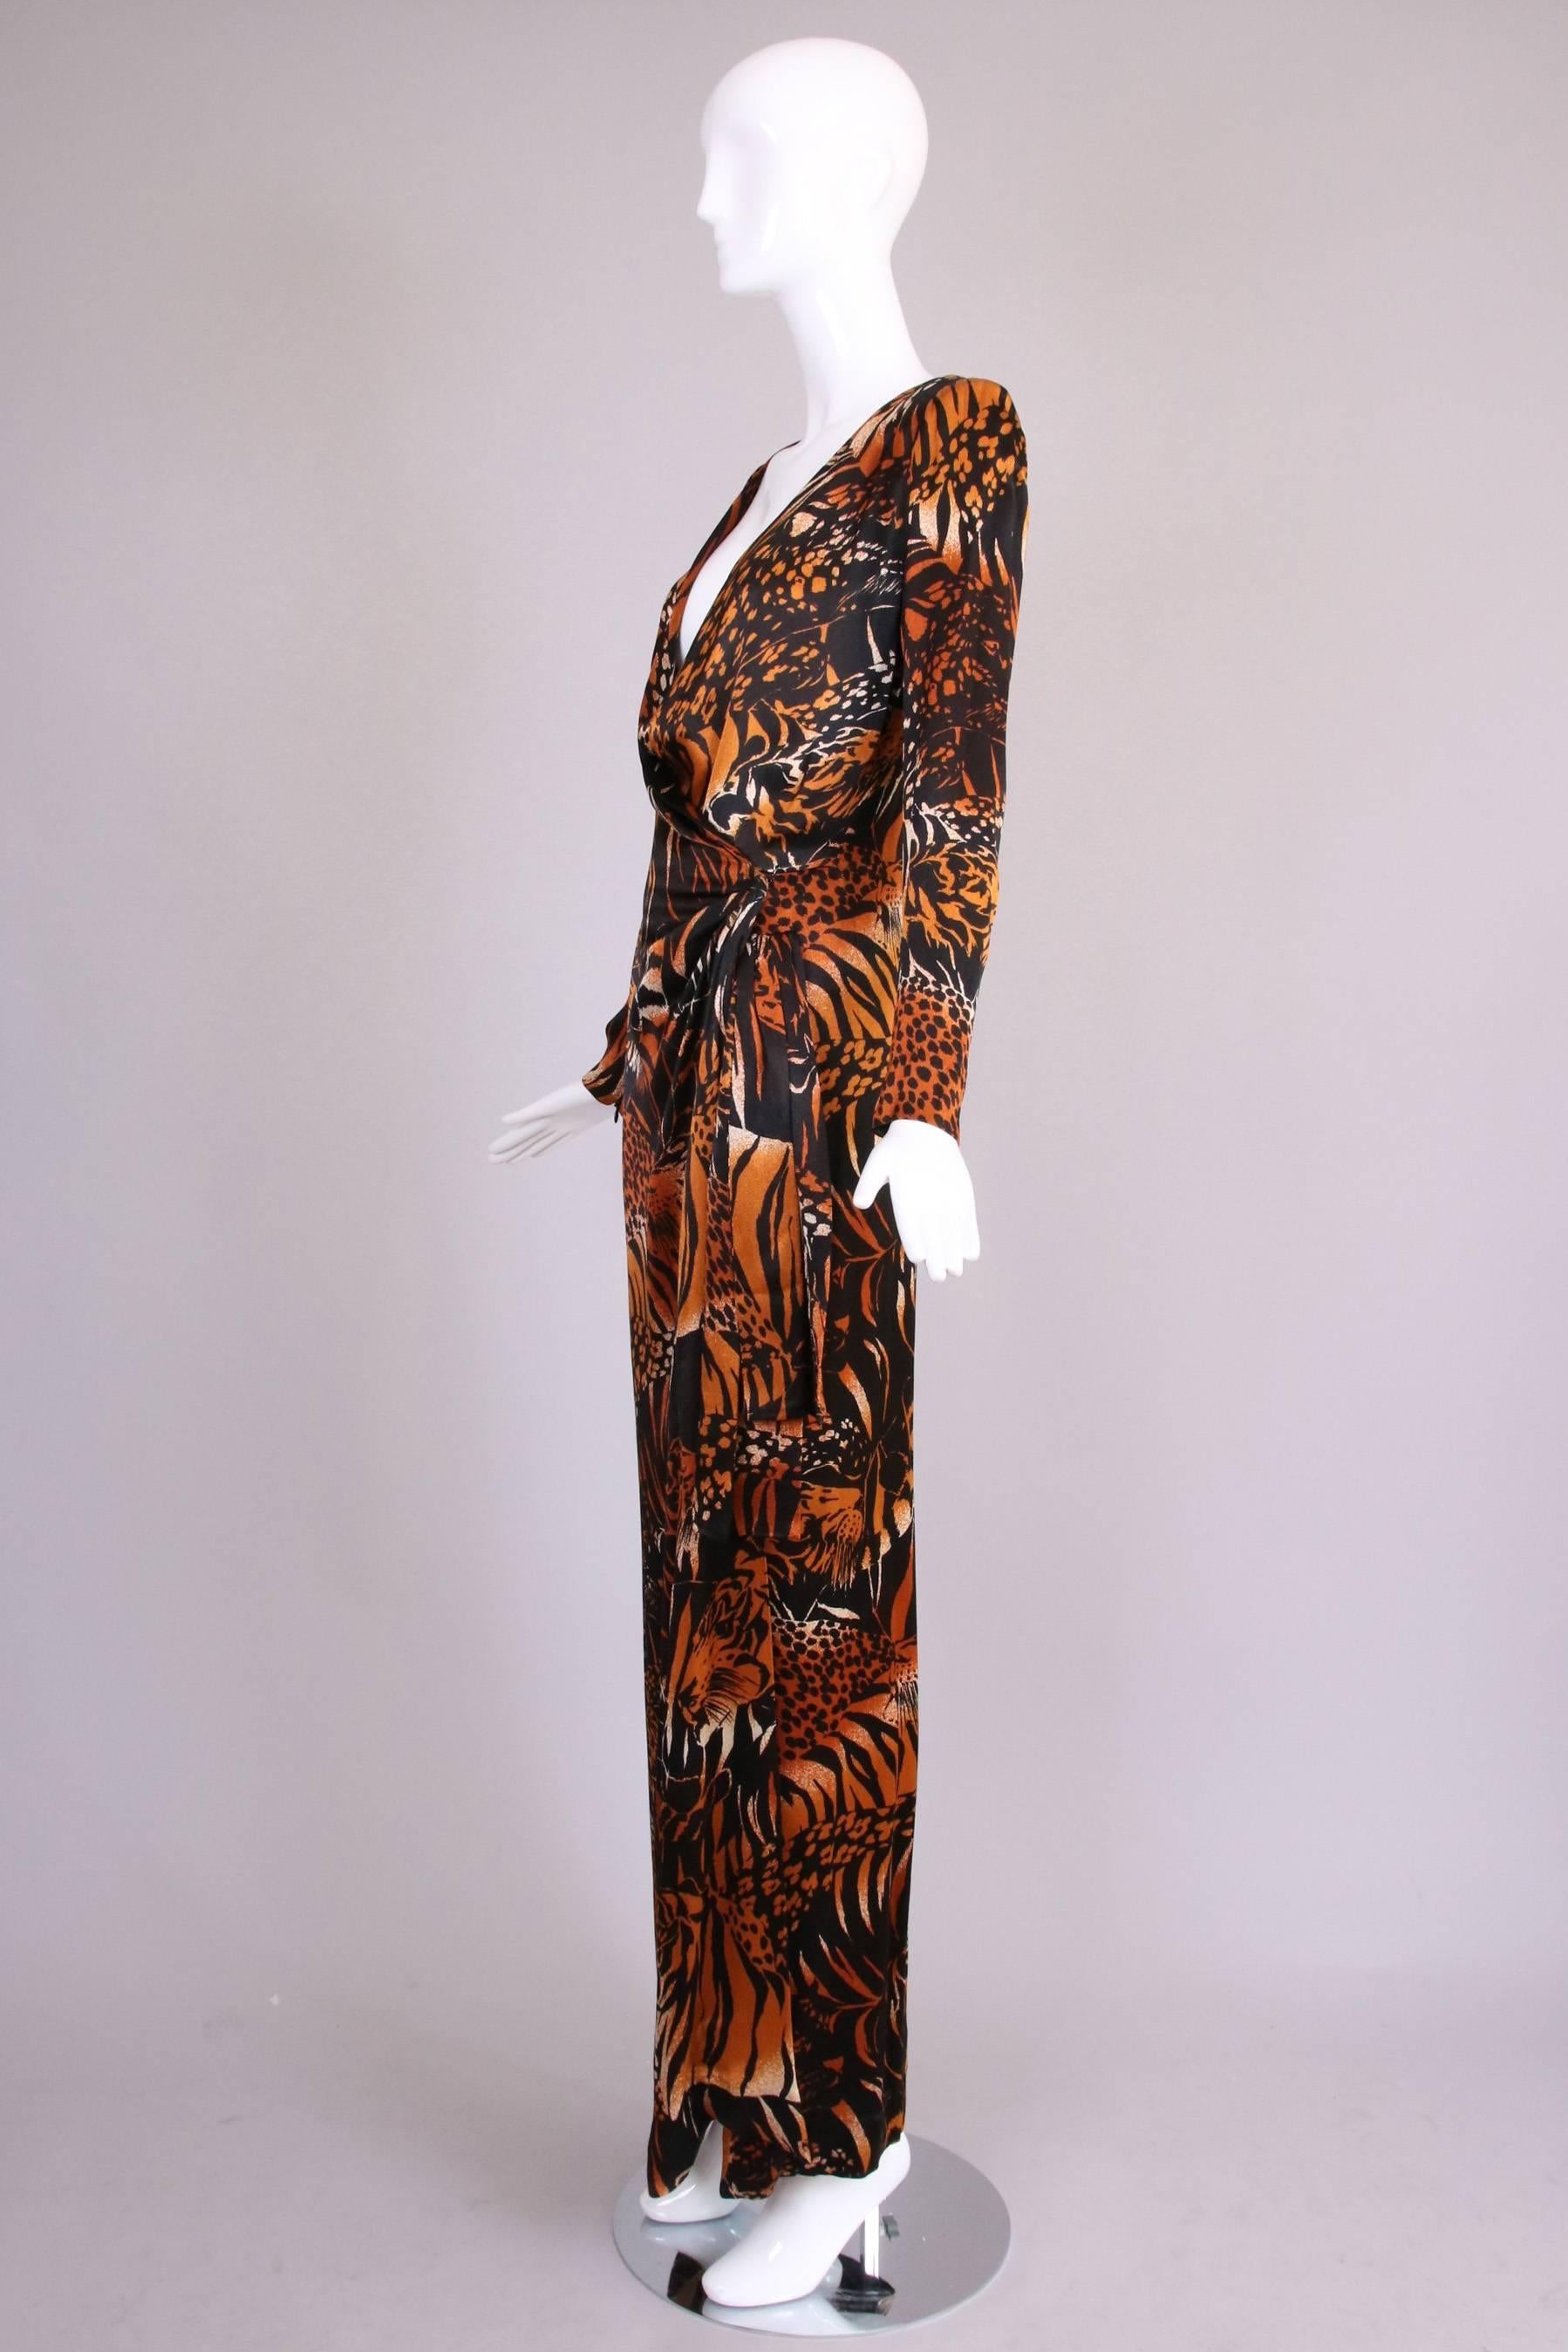 yves saint laurent evening dress in patterned gilt and silver lurex animal-print motifs